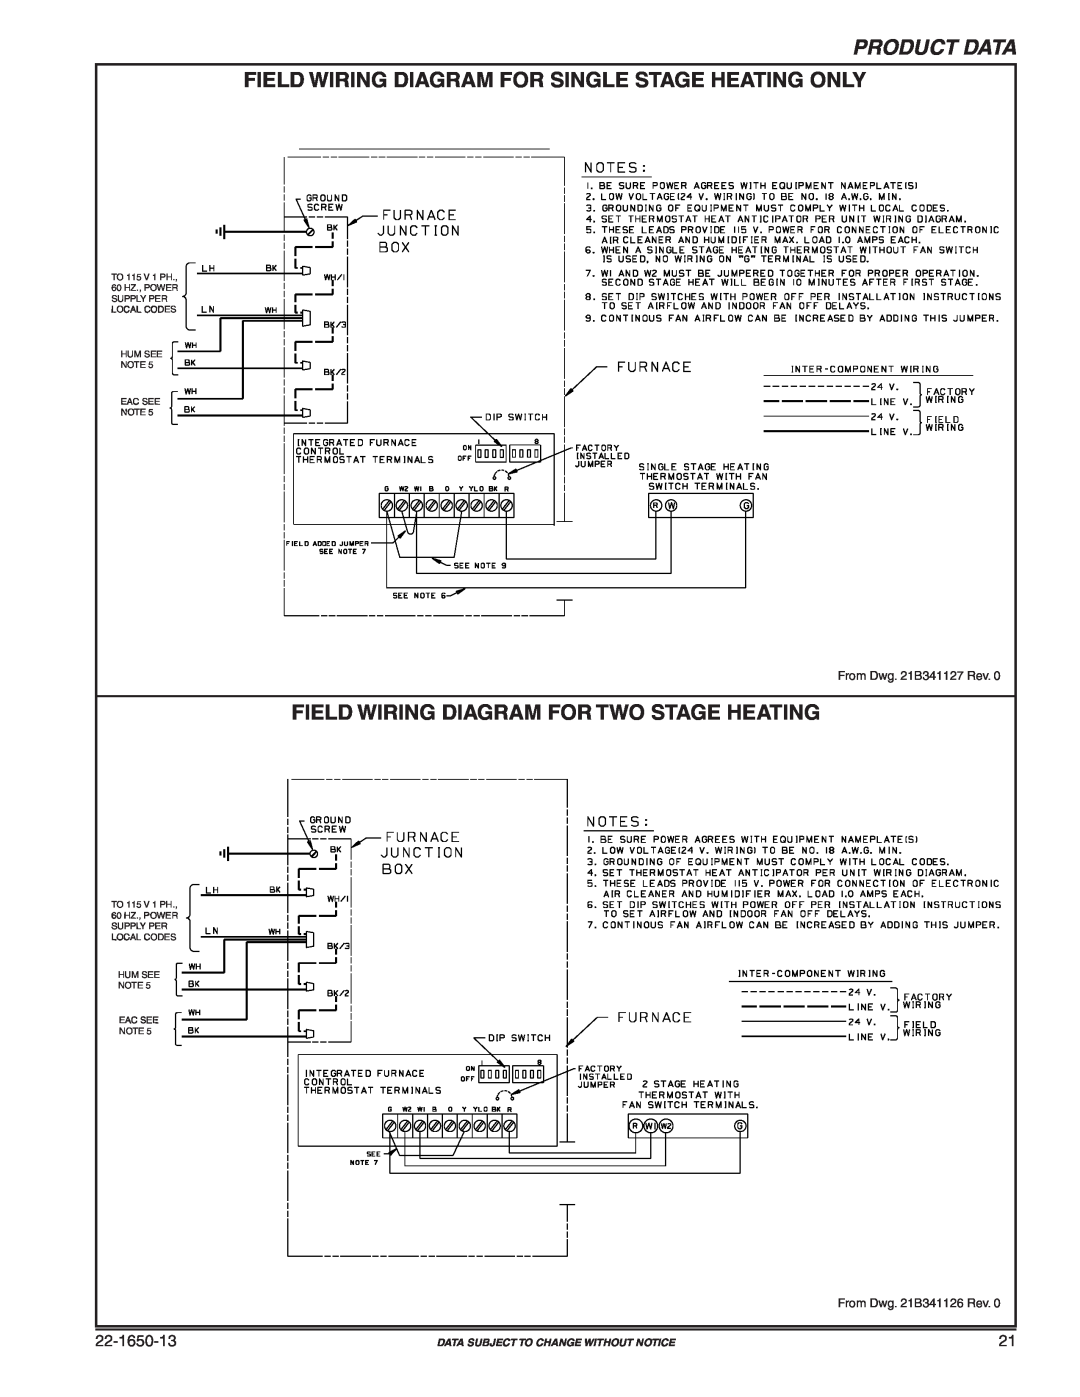 Trane TUD2B100A9V3VB manual Product Data, Field Wiring Diagram For Two Stage Heating, 22-1650-13, Hum See, Eac See 